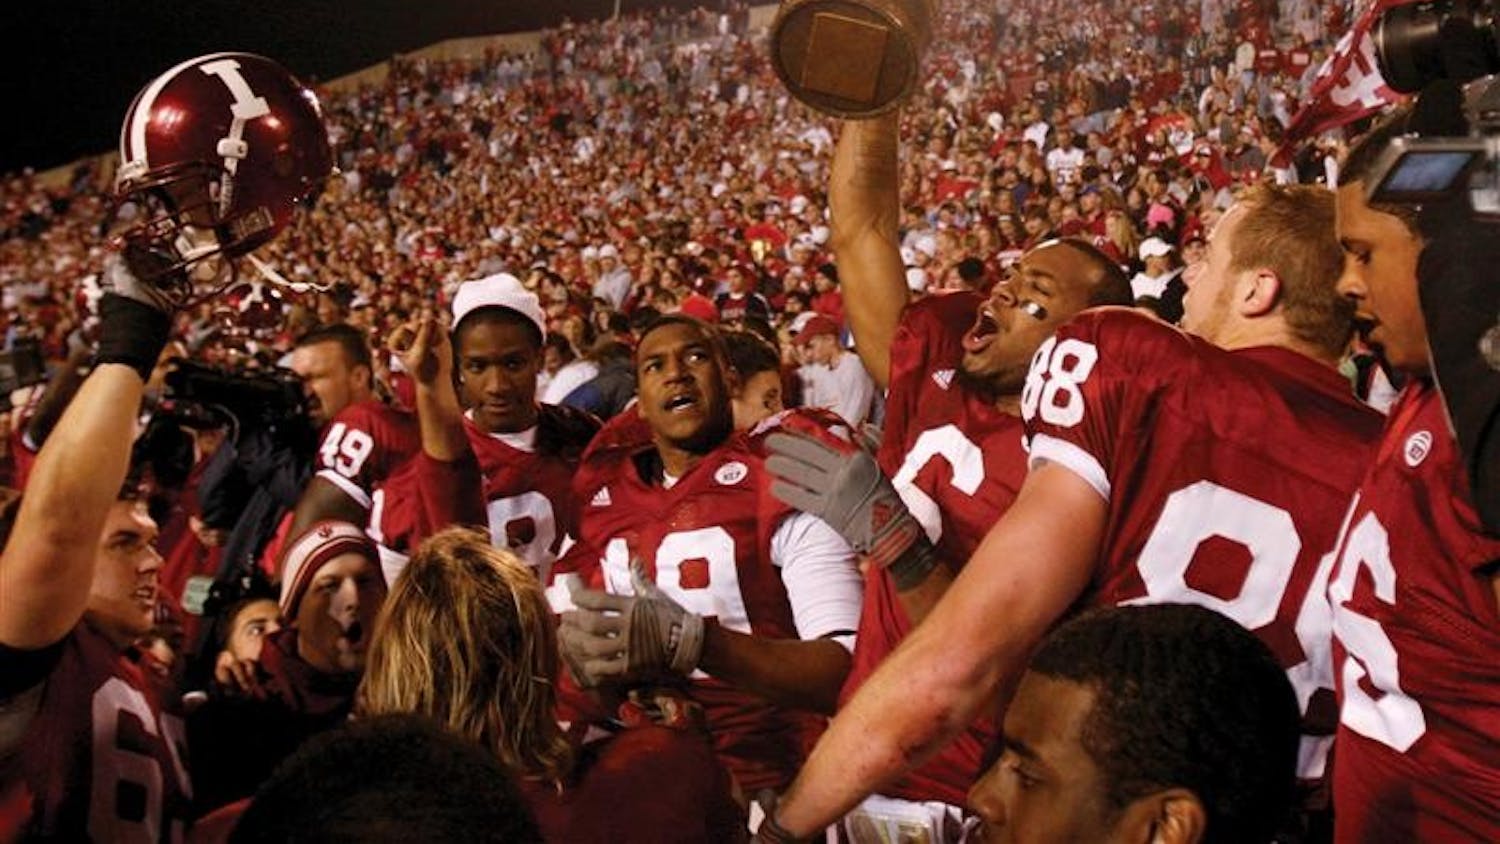 Members of the football team celebrate after winning the Oaken Bucket game against Purdue on Saturday, Nov. 17, 2007. Head coach Bill Lynch, who led the team to a 7-5 record and a likely bowl appearance, recently signed an agreement to remain head coach through July 1, 2012.